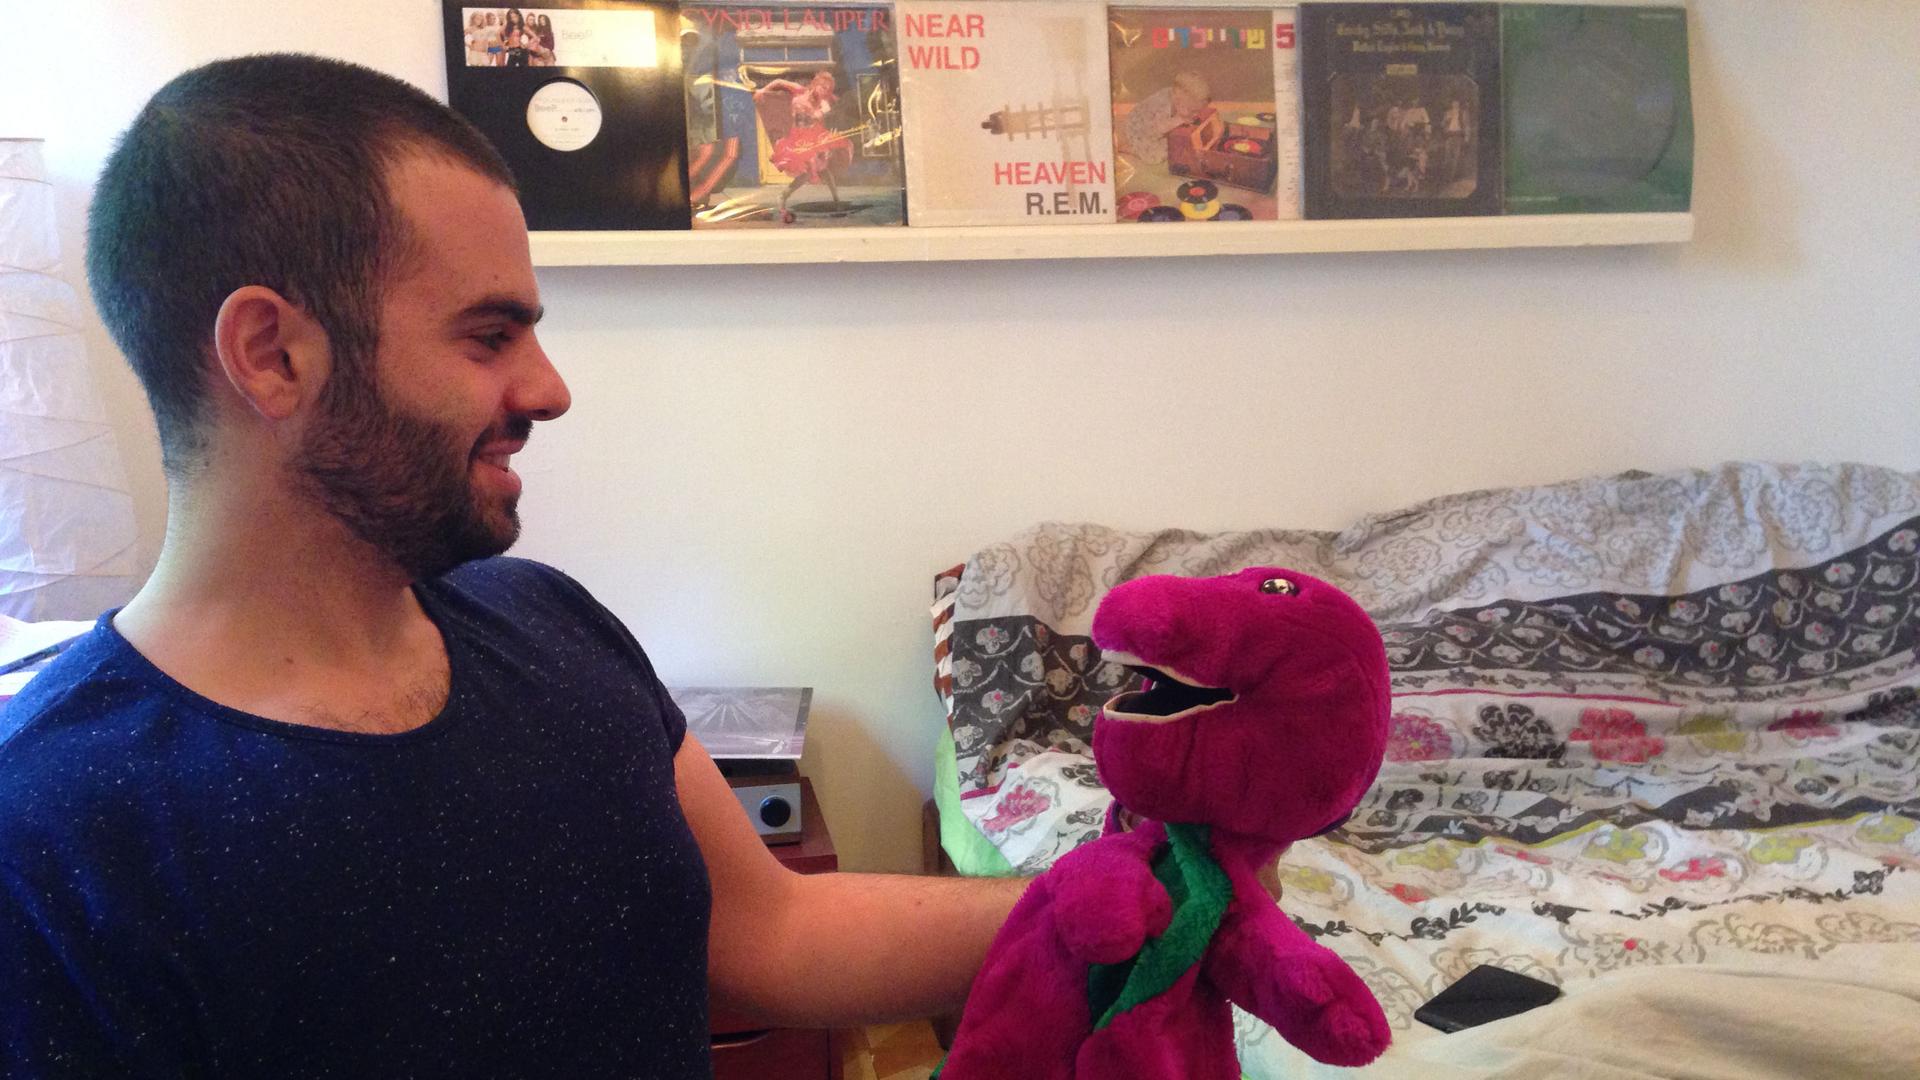 Asaf Yusufov, who started the "Bernie in Hebrew" Facebook page, holds a Barney the Dinosaur that a friend gave him as a gag gift. (Bernie and Barney are spelled the same in Hebrew.)